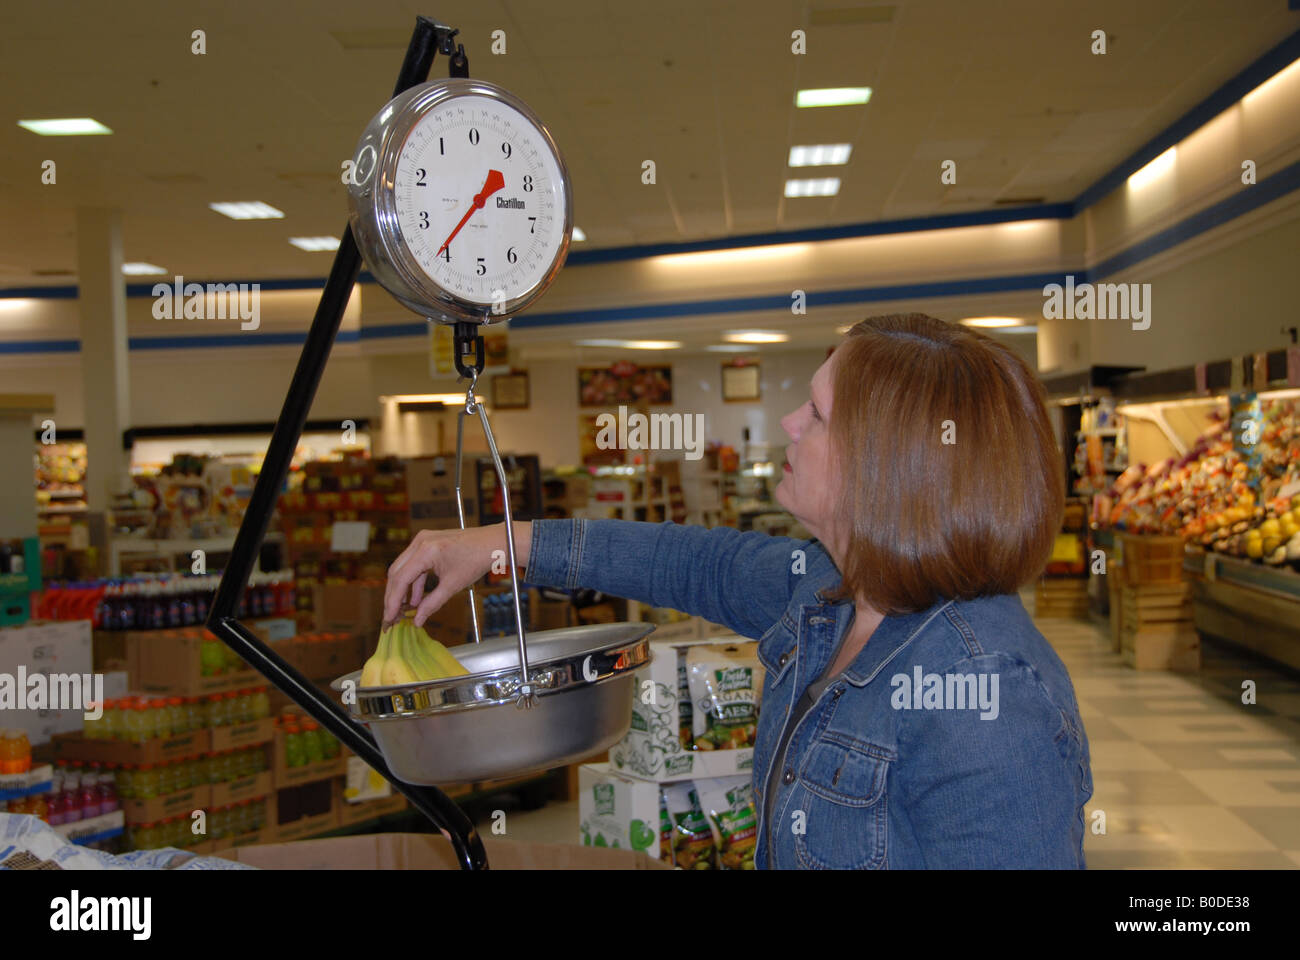 Hanging Scales: Grocery Store Scales for Produce, Meat & More